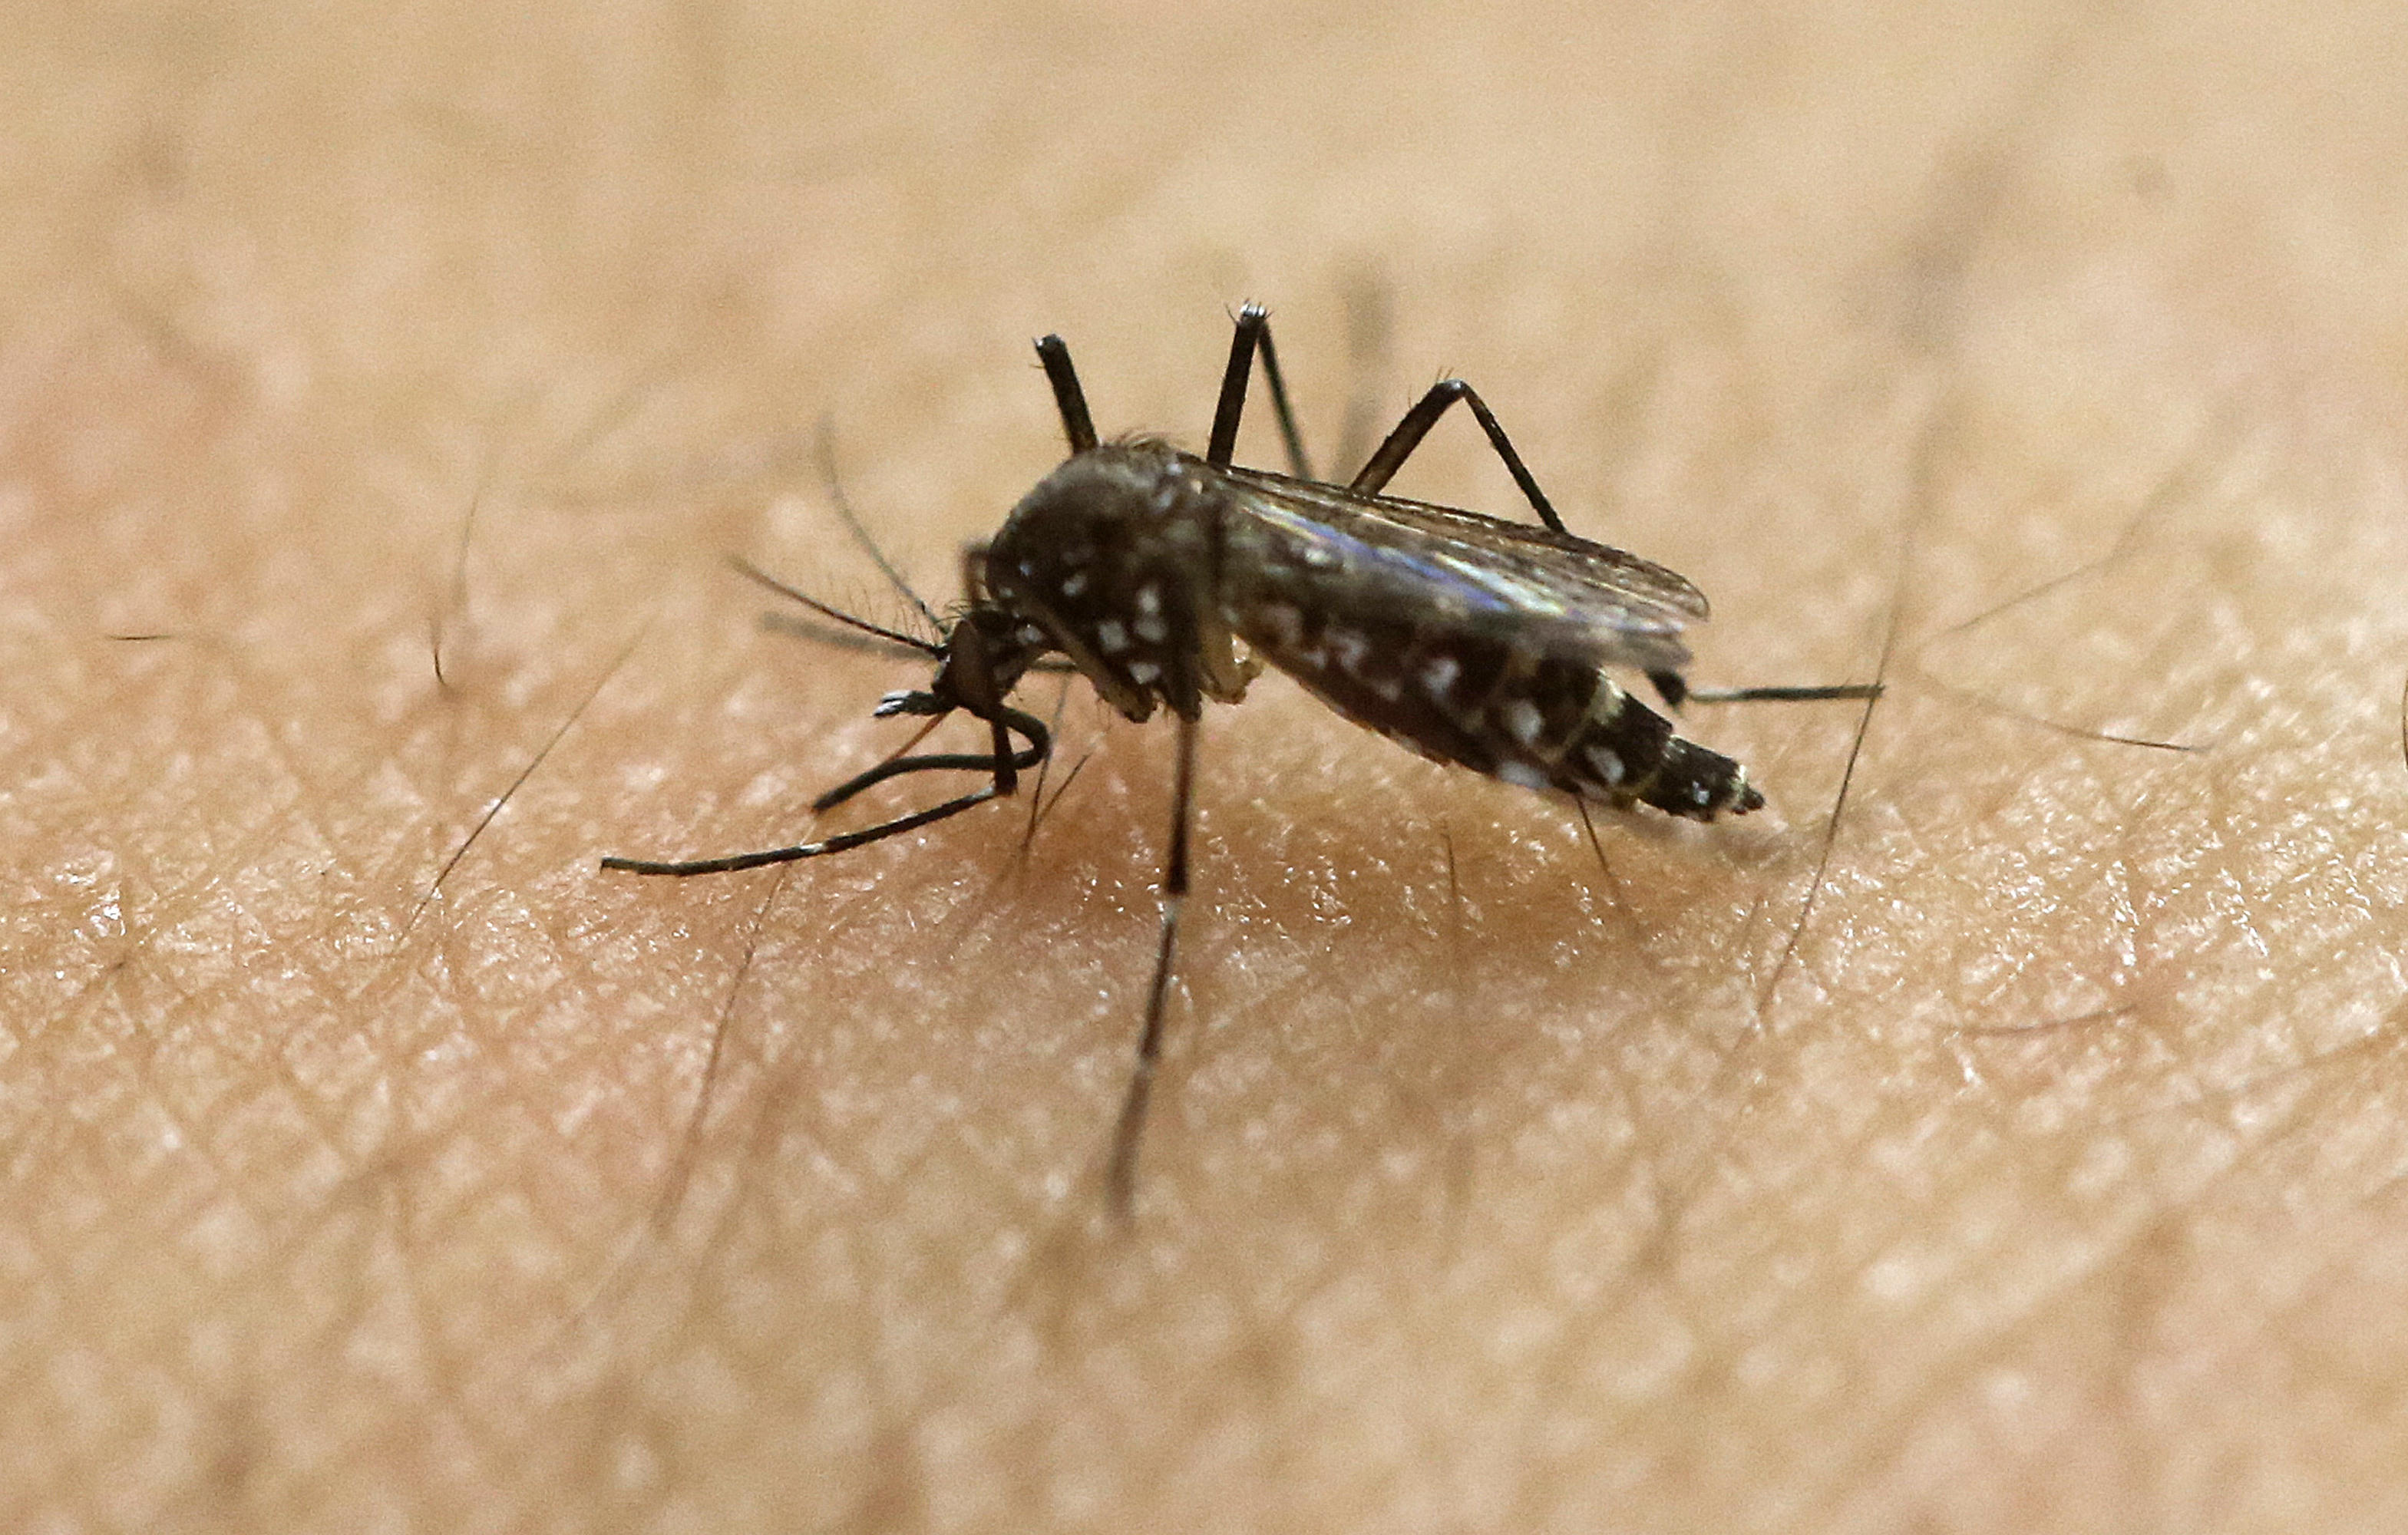 FILE - In this Jan. 18, 2016, file photo, a female Aedes aegypti mosquito acquires a blood meal on the arm of a researcher at the Biomedical Sciences Institute in the Sao Paulo's University in Sao Paulo, Brazil. The CDC is working with Florida health officials to investigate what could be the first Zika infection from a mosquito bite in the continental United States. They said Tuesday, July 19, 2016, lab tests confirm a person in the Miami area is infected with the Zika virus, and there may not be any connection to someone traveling outside the country. (AP Photo/Andre Penner, File)